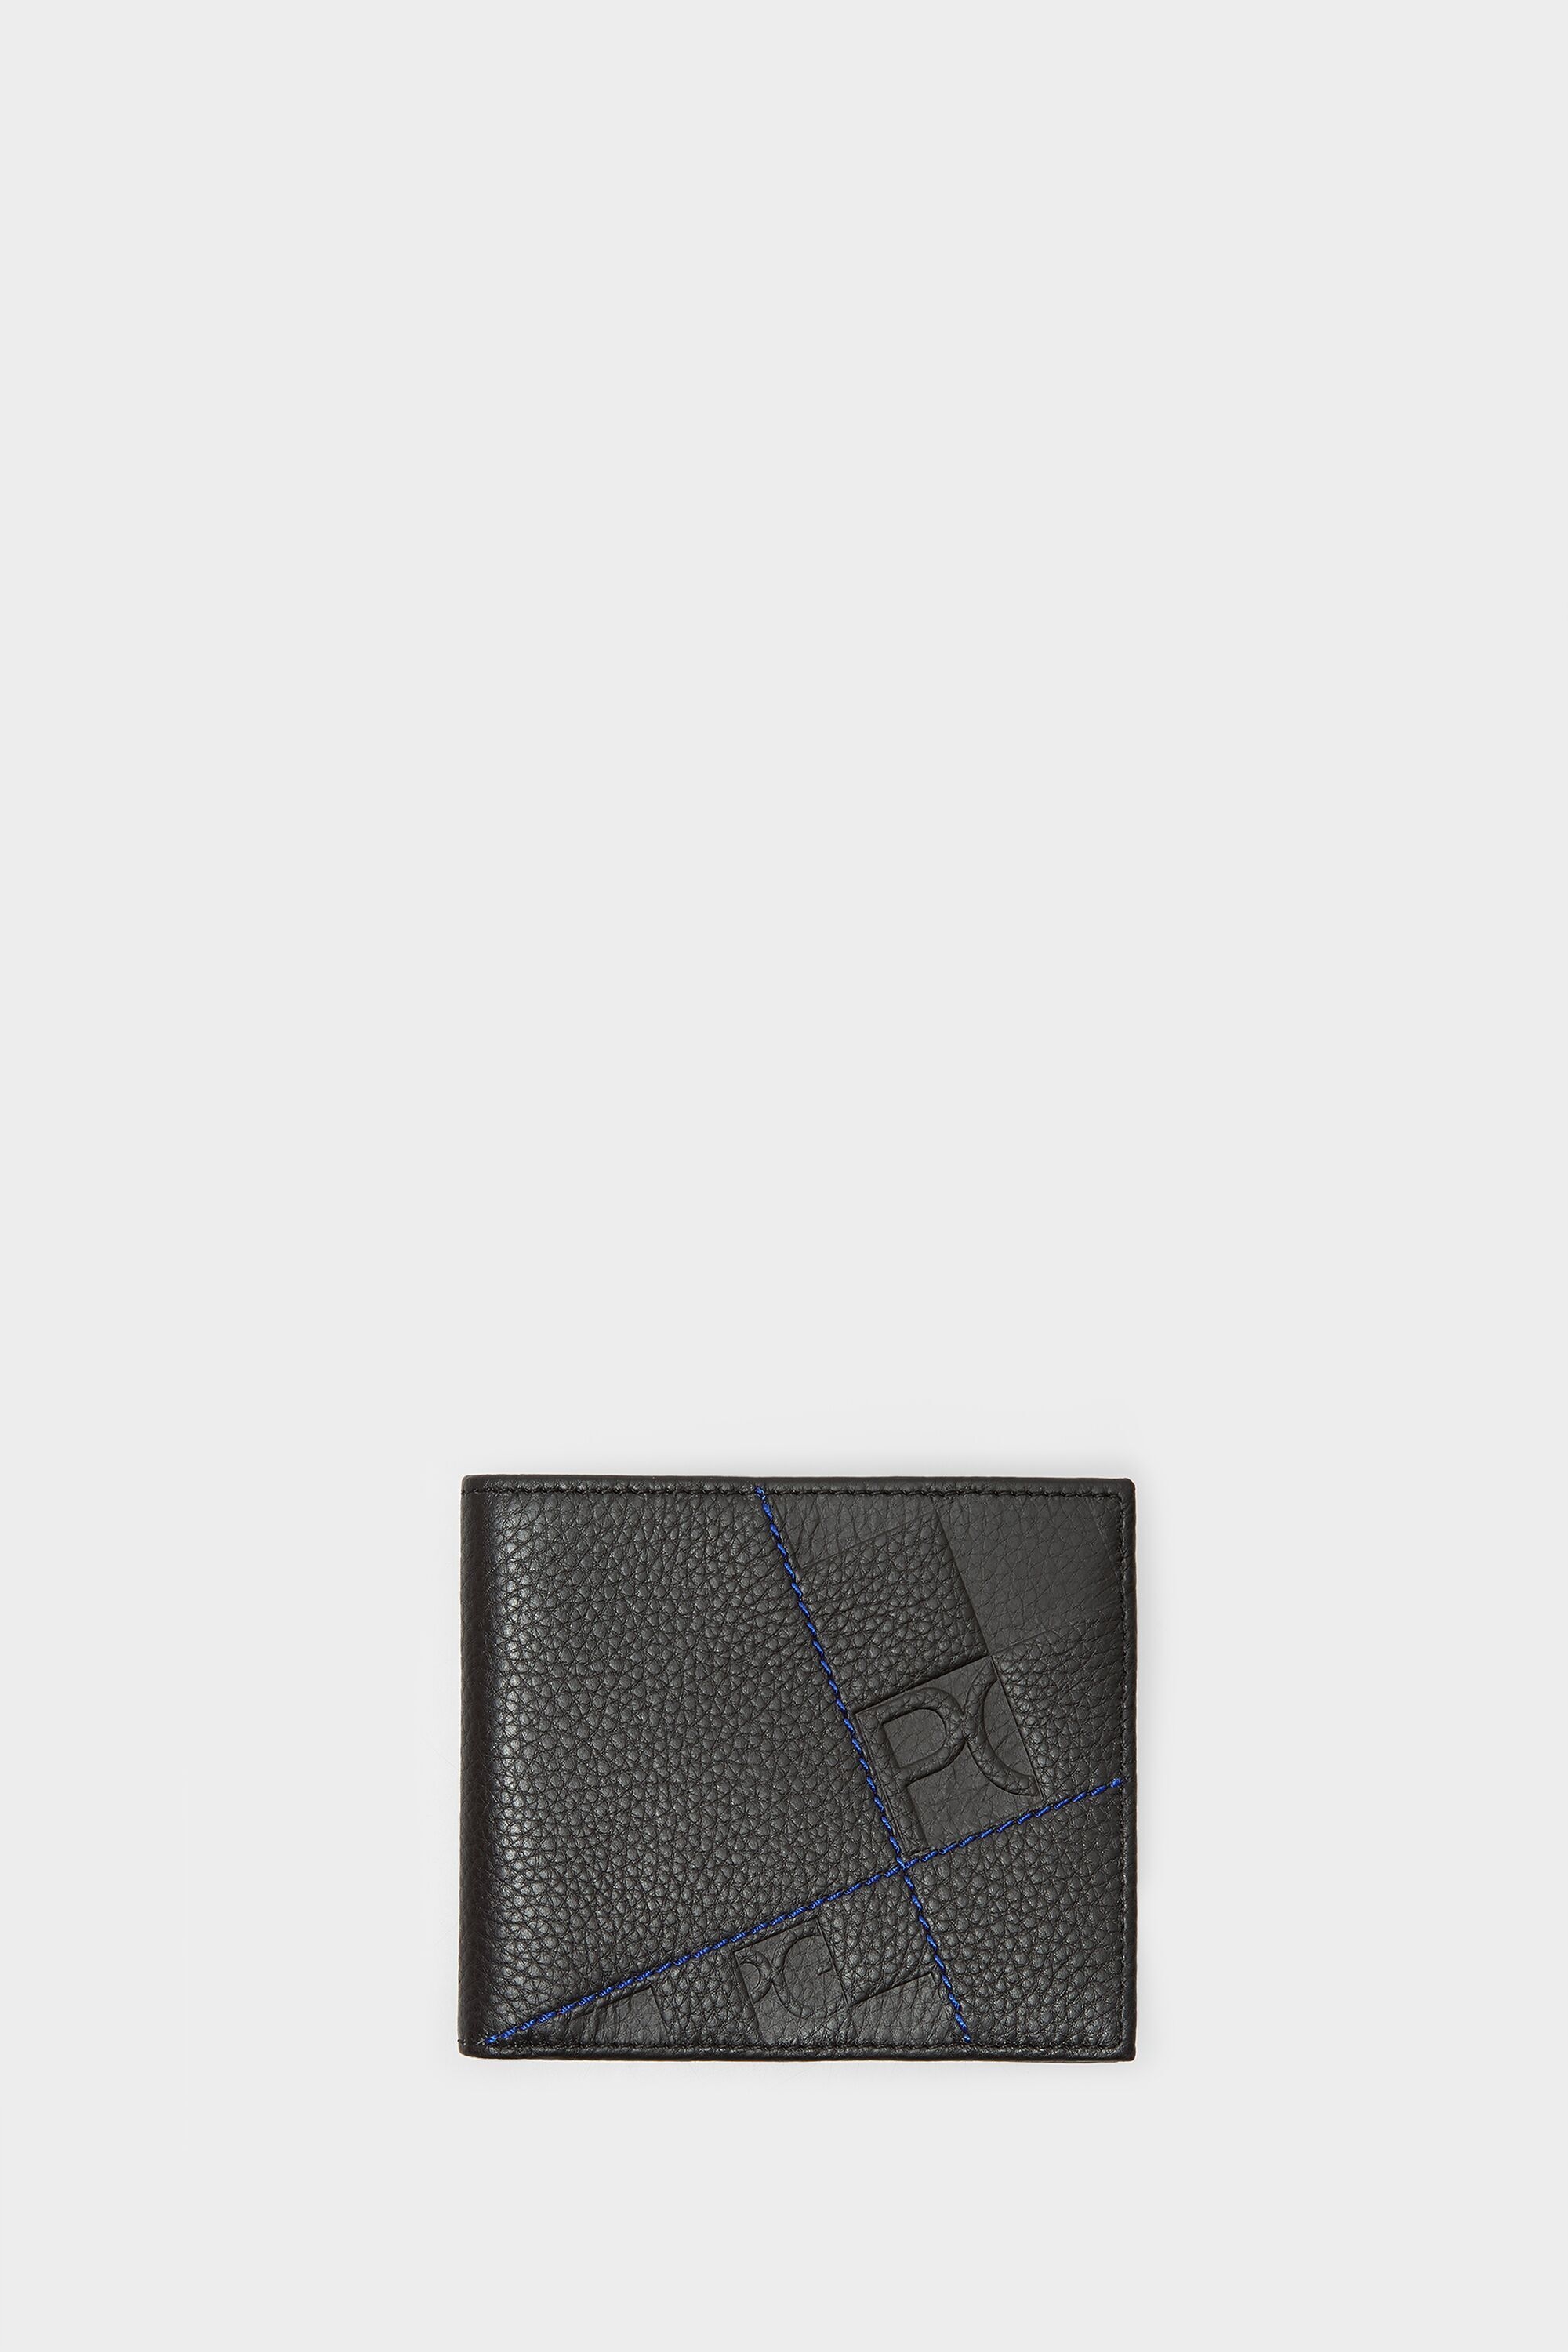 PG cube leather wallet